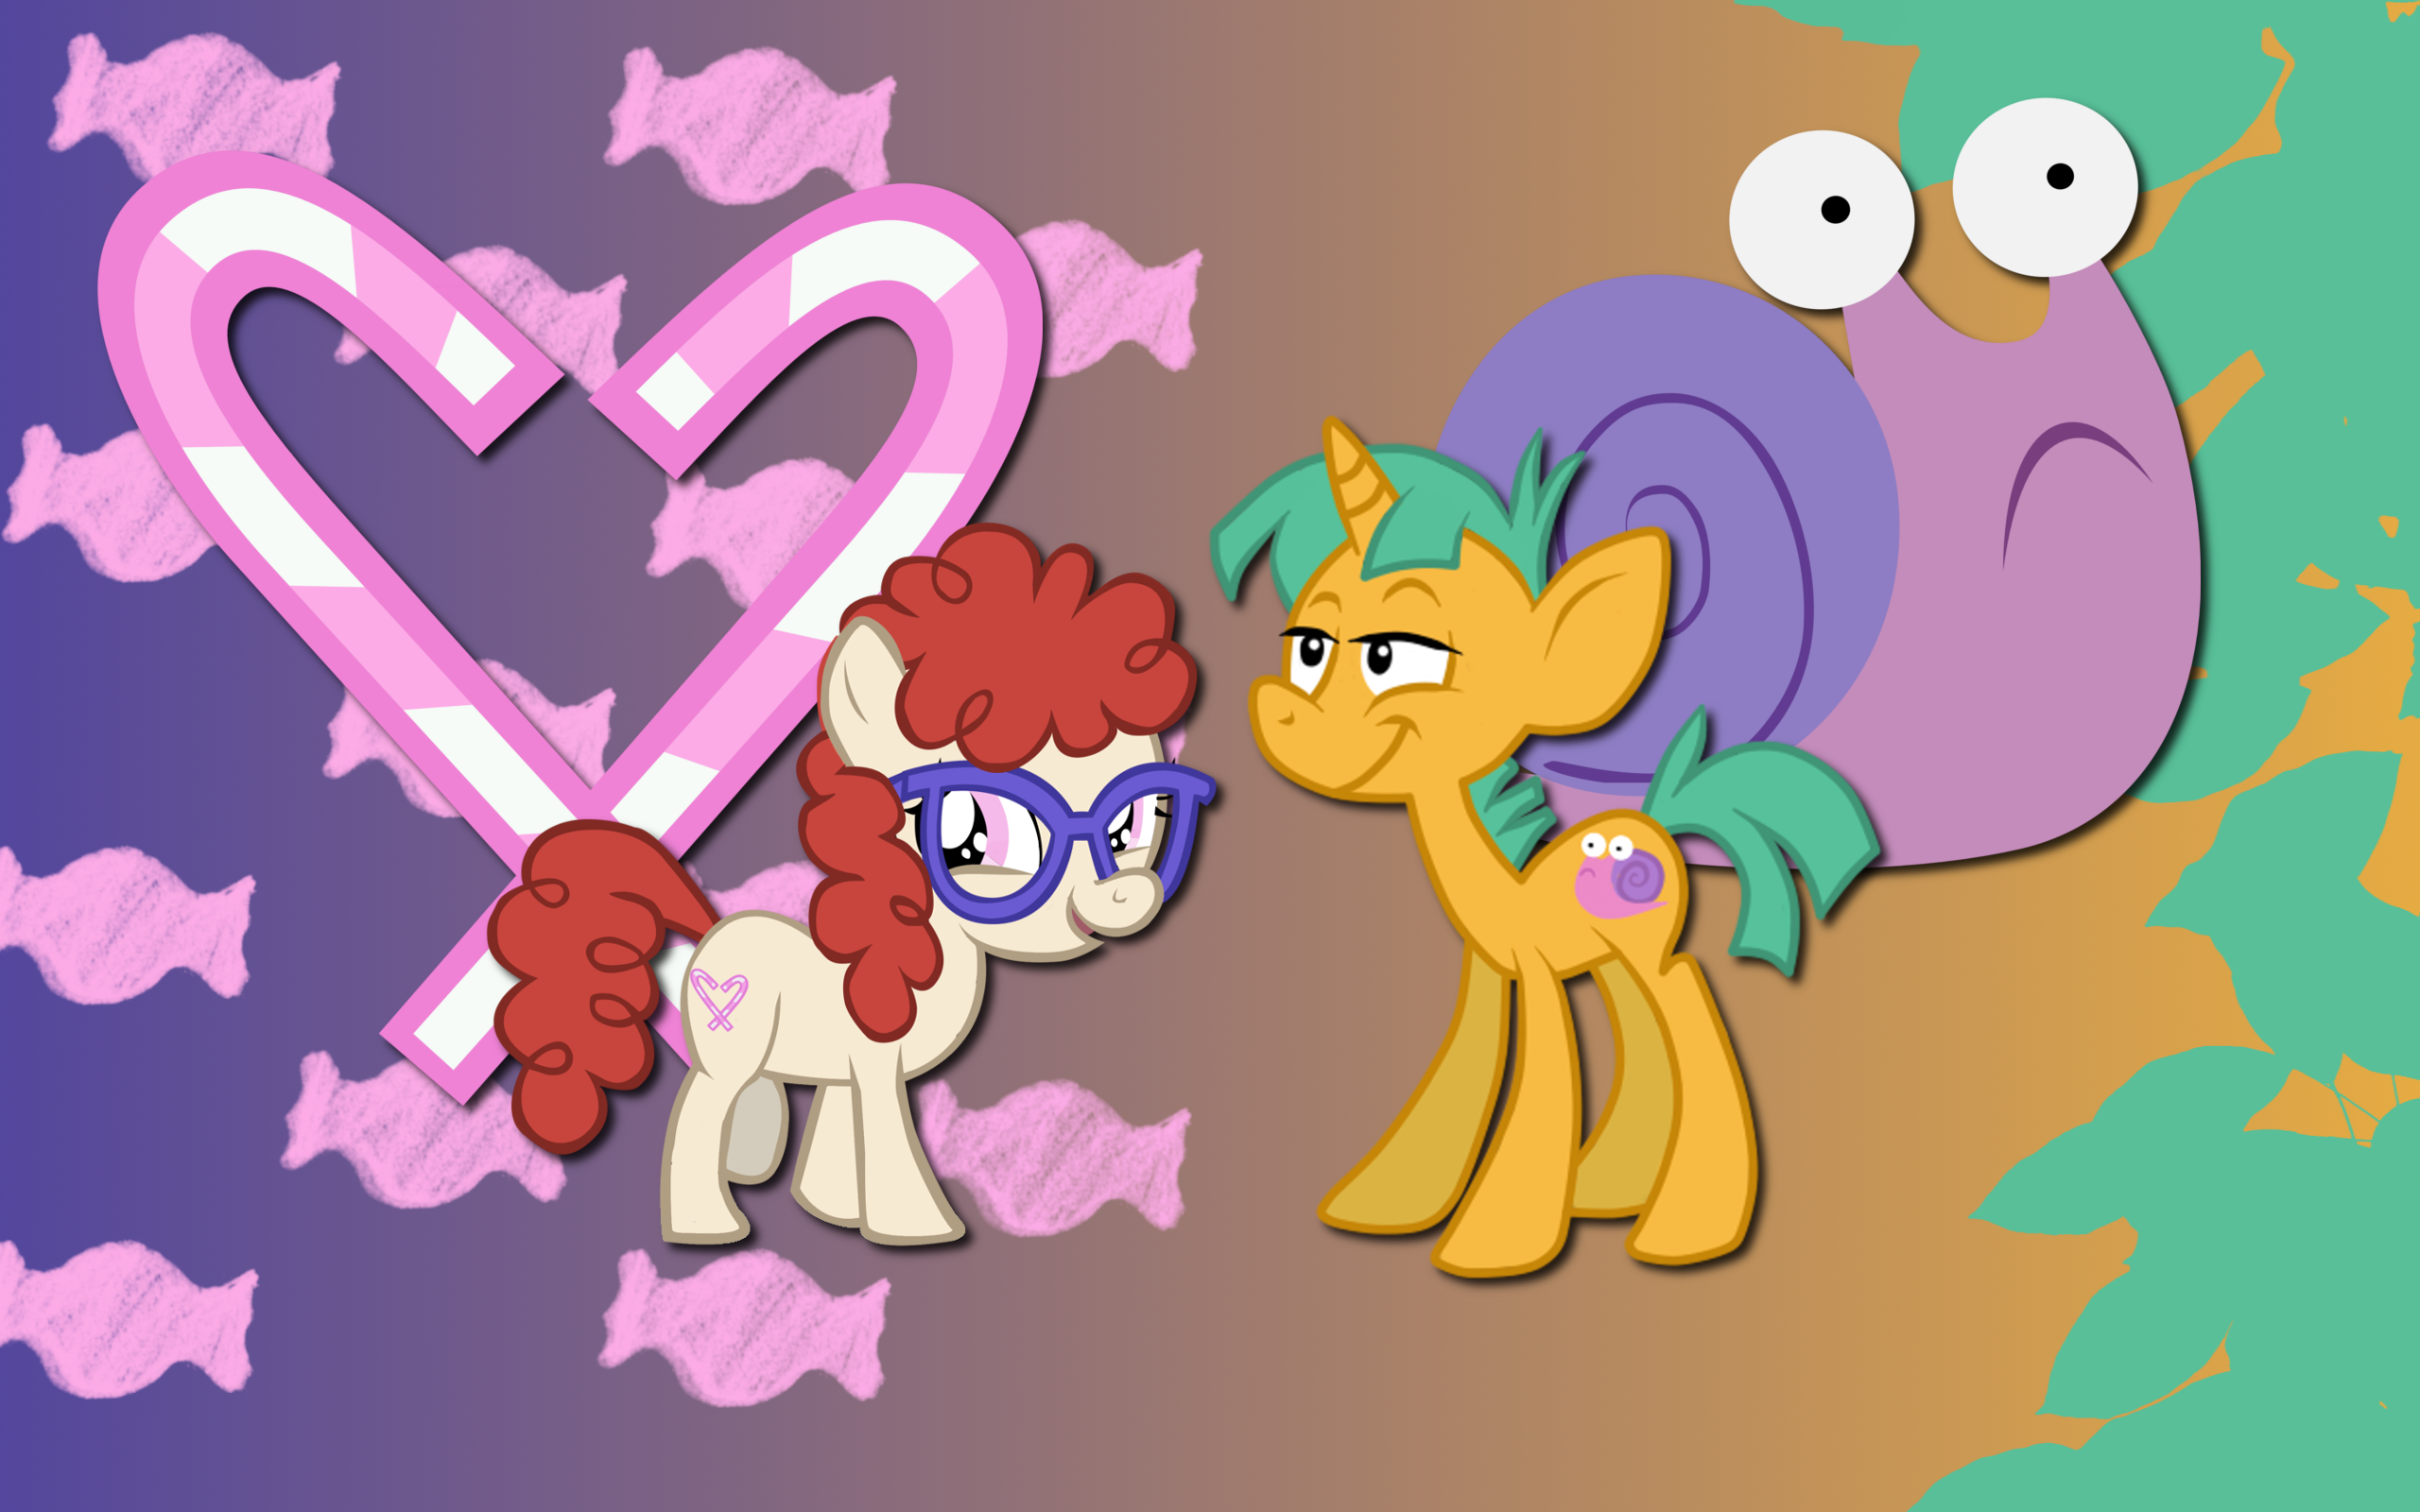 Twist Snails wallpaper by AliceHumanSacrifice0, ronaldhennessy, SeaBastian and The-Smiling-Pony